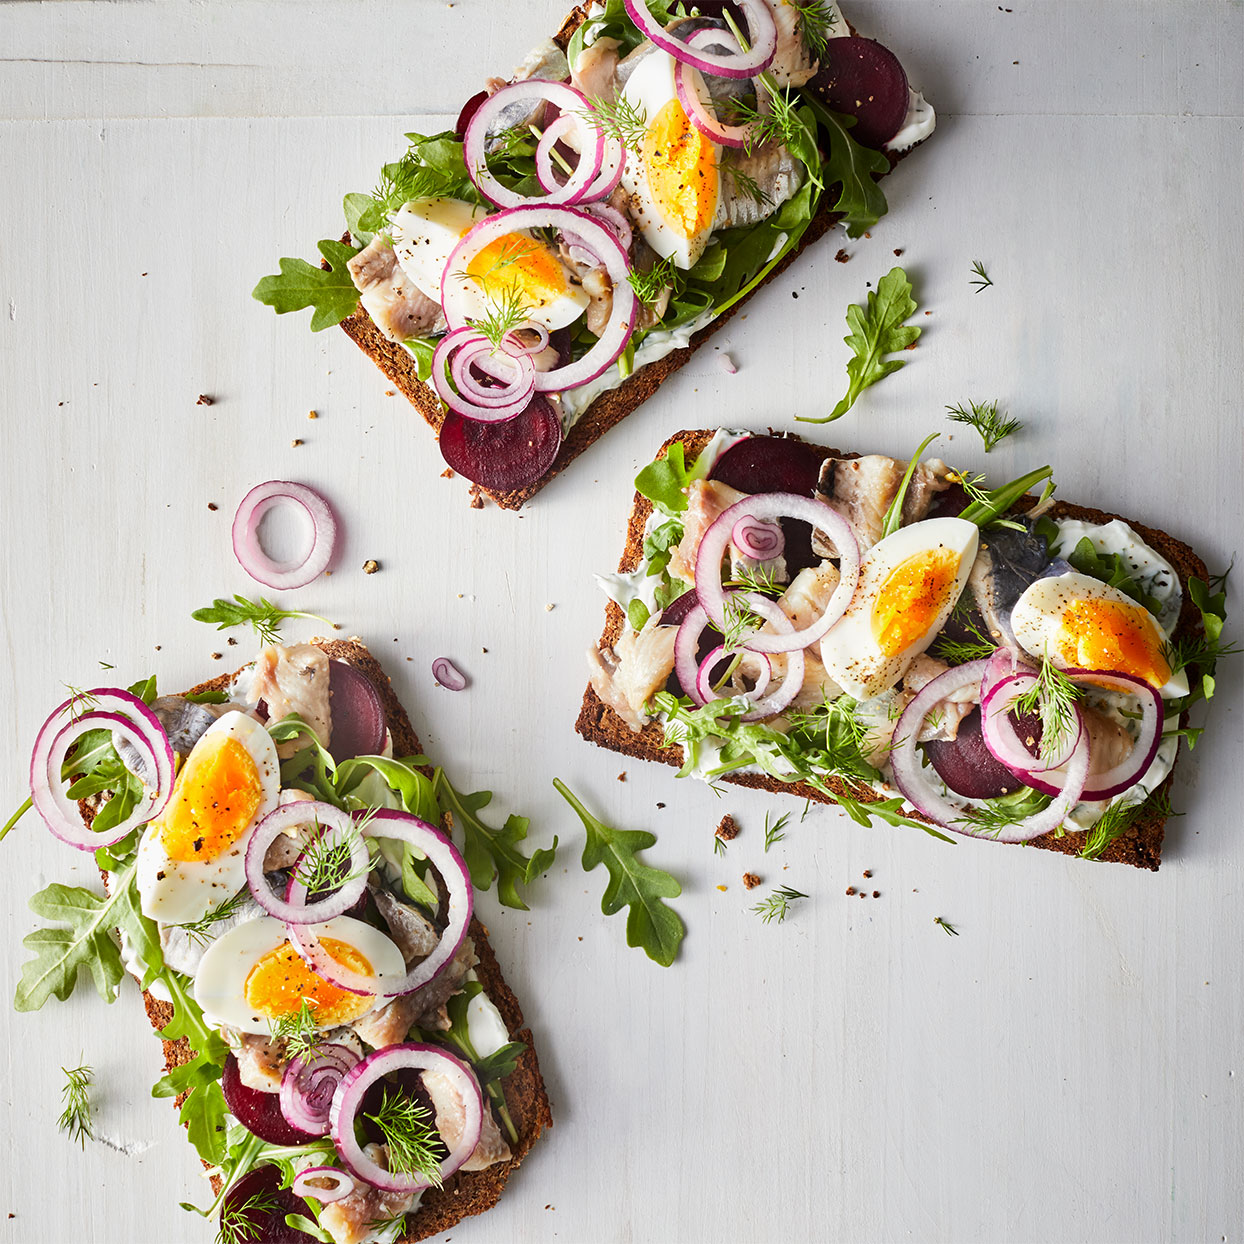 <p>Smoked salmon isn't the only flaky fish made for breakfast breads. This pickled herring arrangement makes a delicious sm&oslash;rrebr&oslash;d with all the fixings. Or lay the ingredients out on a board and let everyone top their own!</p>
                          <p> </p>
                          